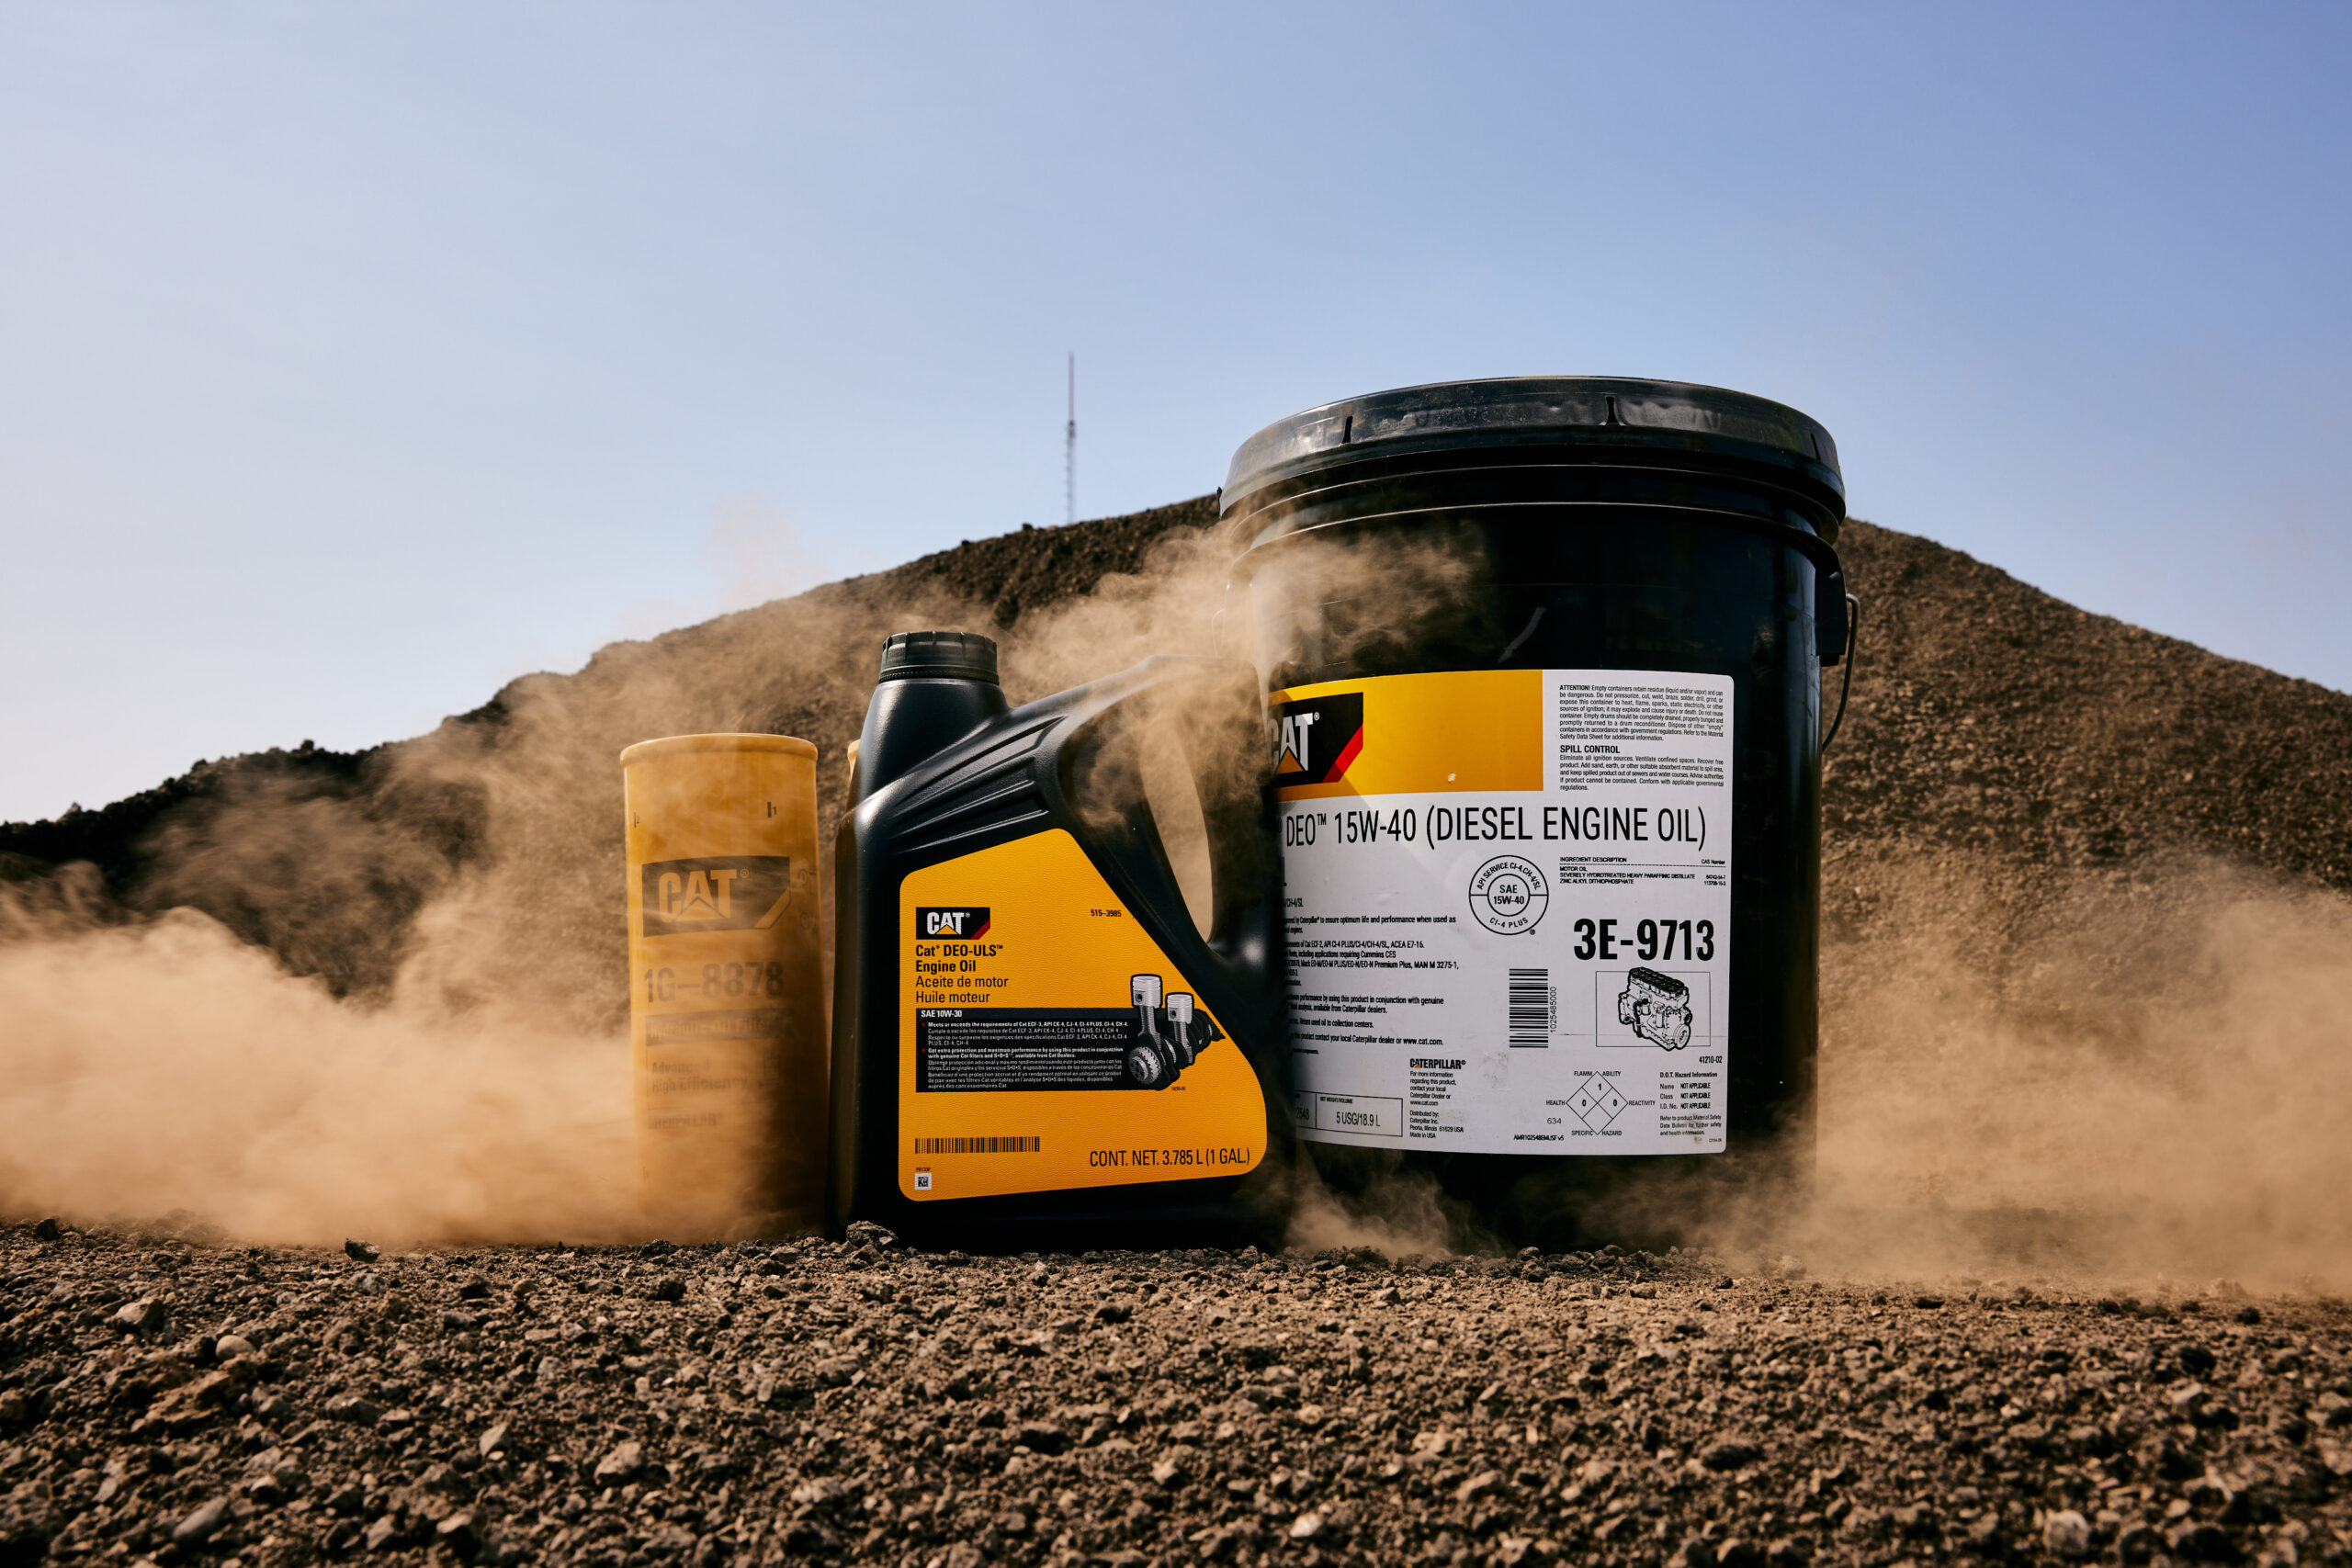 Cat 1G-8878 Hydraulic Oil filter, Engine oil gallon, and Diesel Engine oil tub posed in front of a mound of dirt and rocks. Some dust obstructs the parts